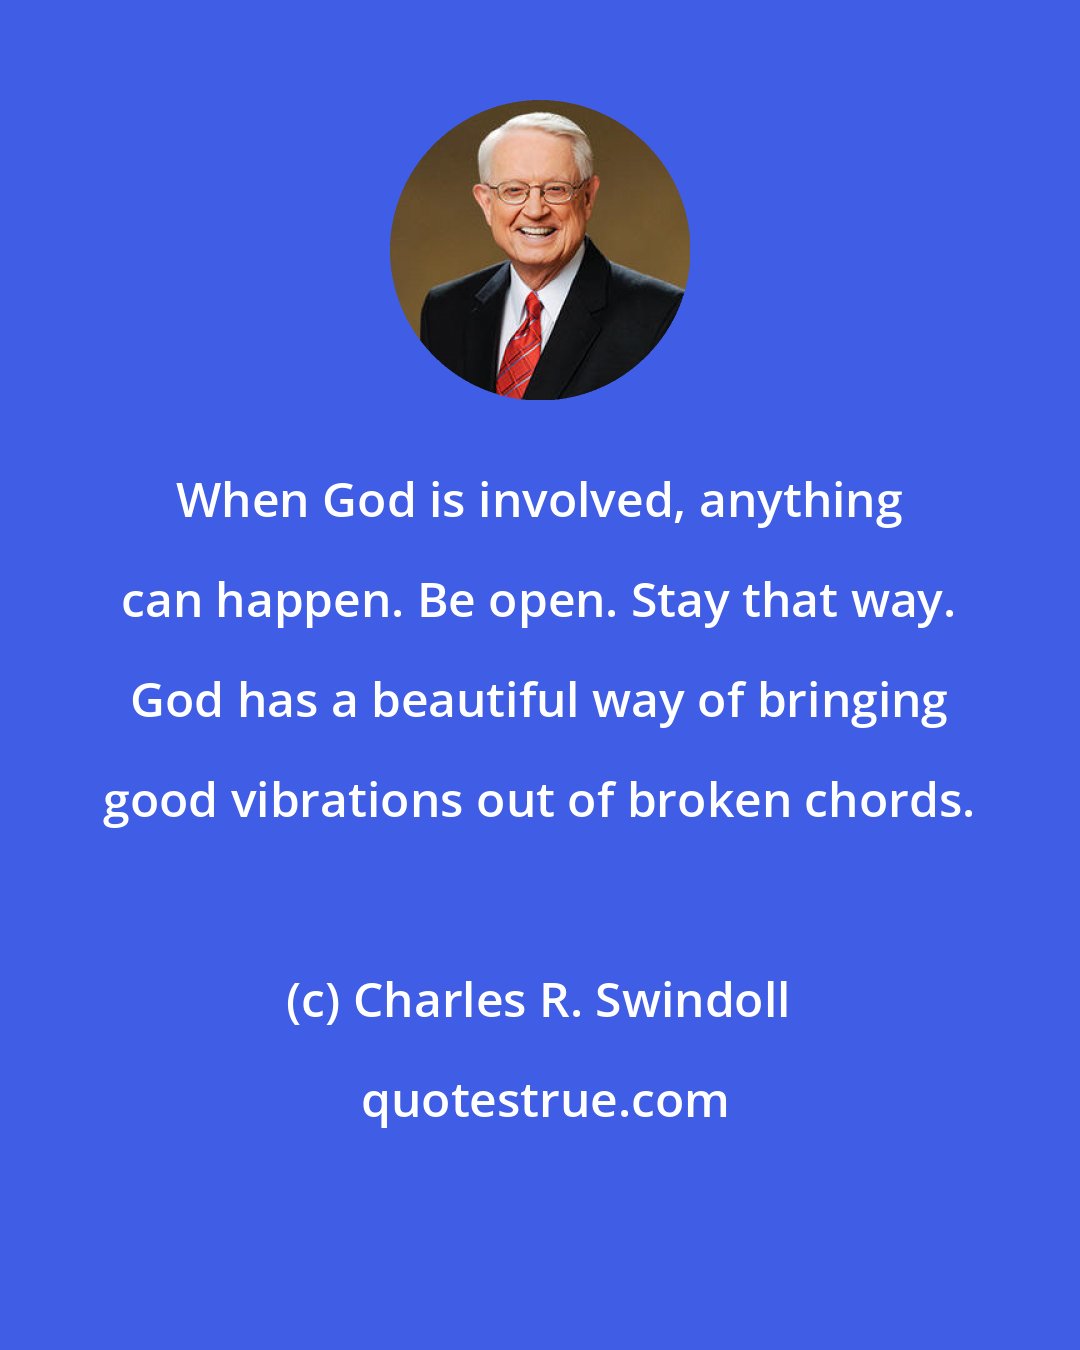 Charles R. Swindoll: When God is involved, anything can happen. Be open. Stay that way. God has a beautiful way of bringing good vibrations out of broken chords.